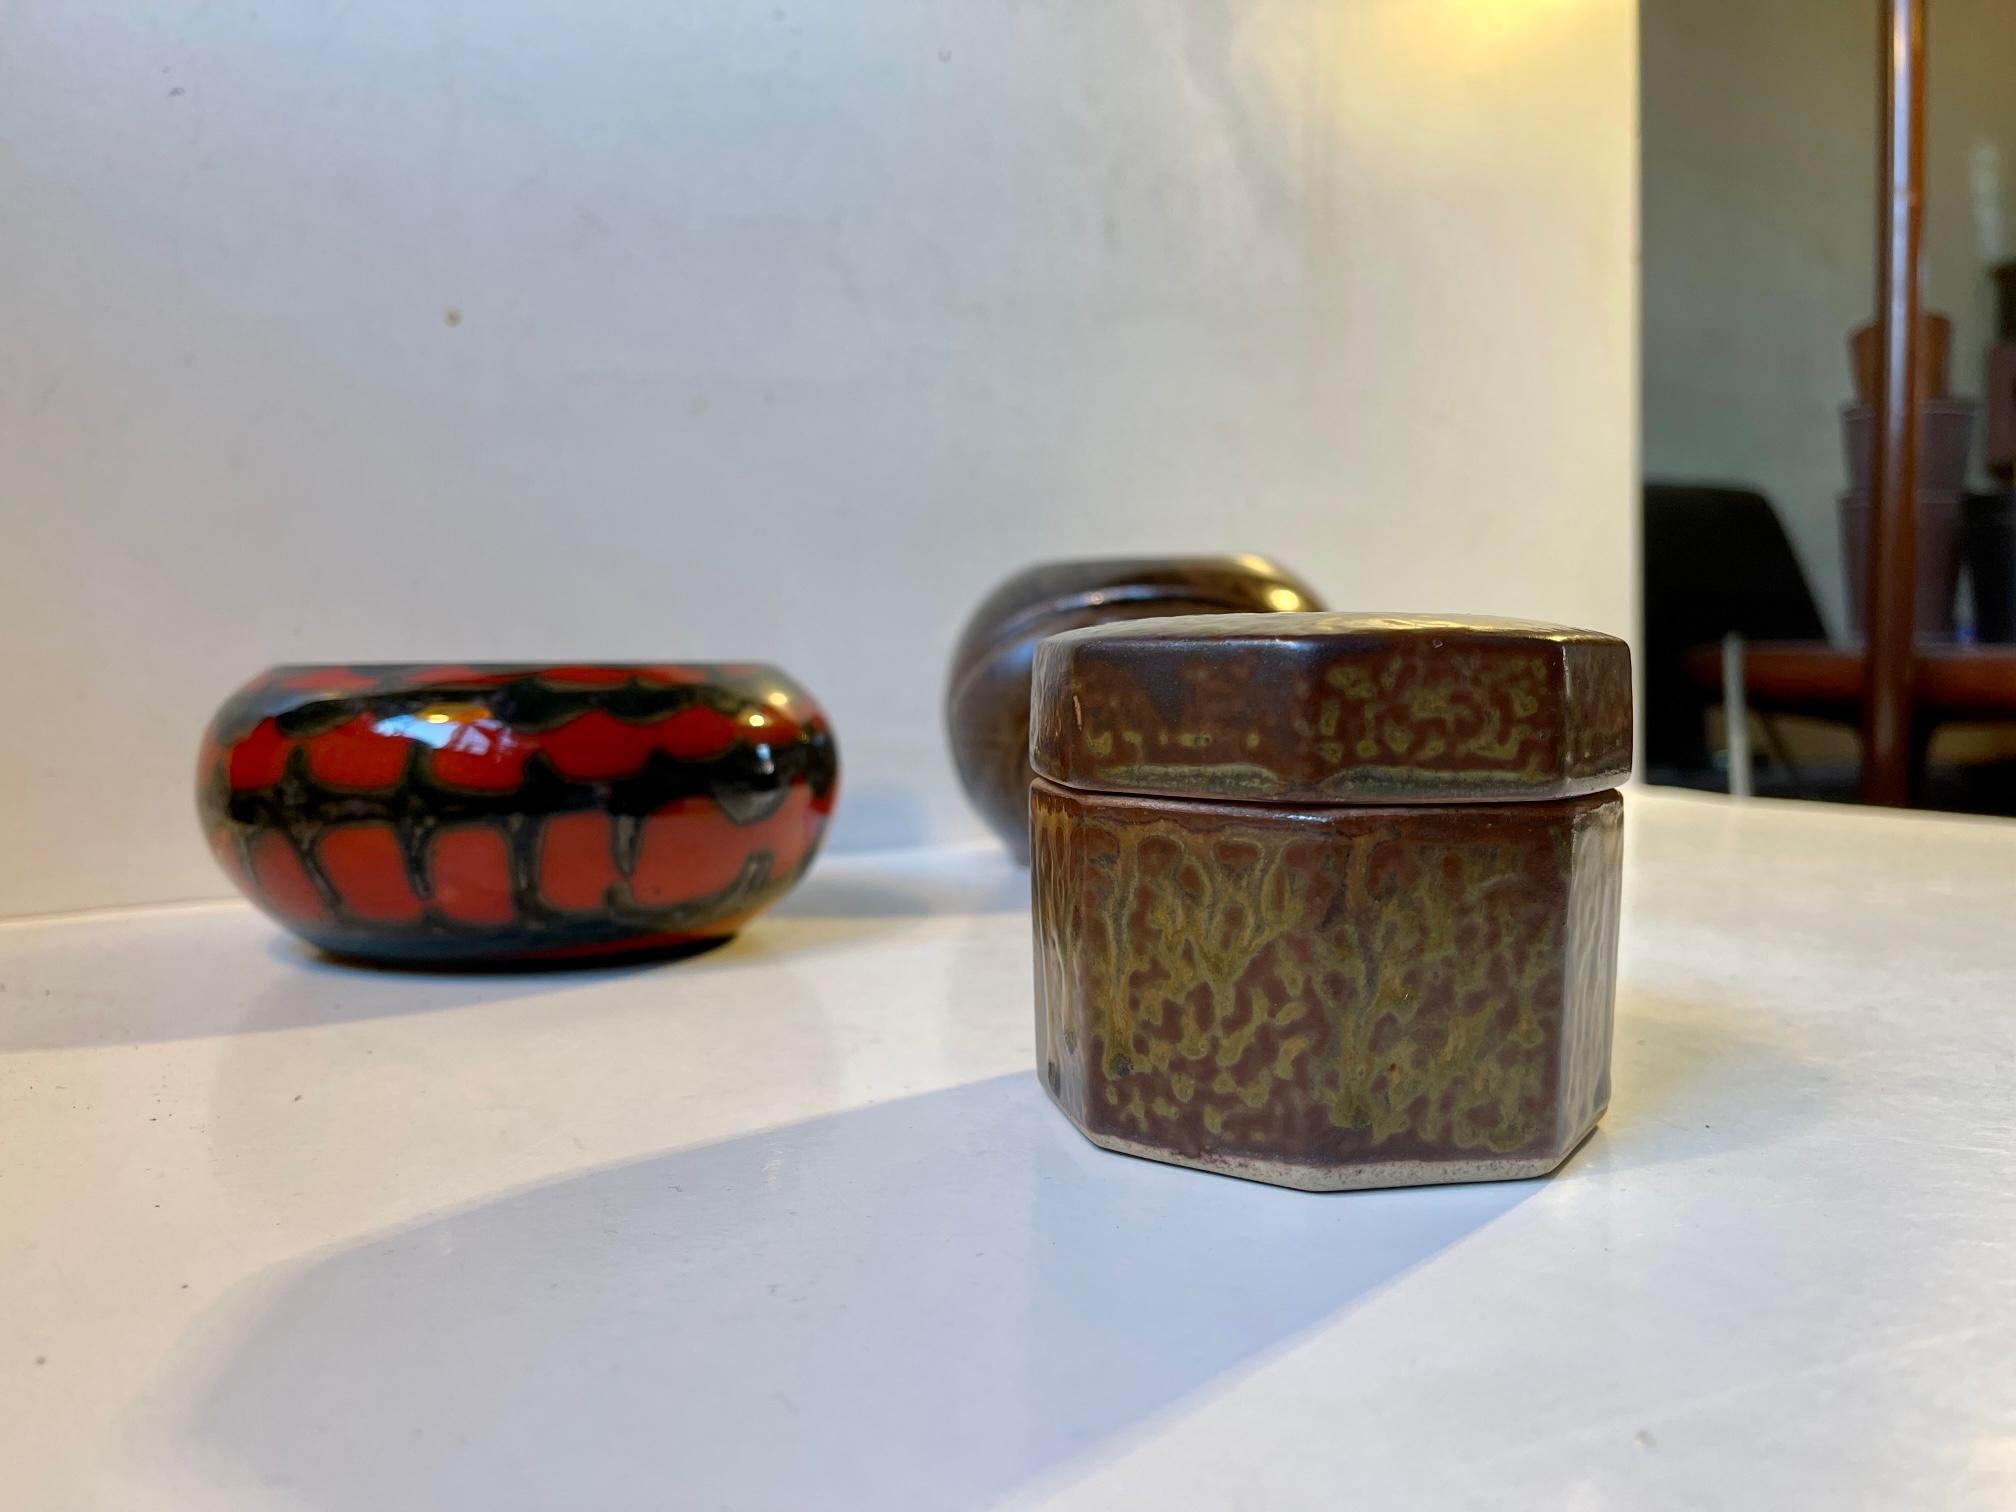 Curated lot of 3 Scandinavian ceramic/stoneware pieces. A bowl/dish by Jette Hellerøe, a ball vase by Robert Bentsen and an unknown octagonal trinket with technical references to Arne Bang and Gerd Bøgelund. All studio made in Denmark/Scandinavi